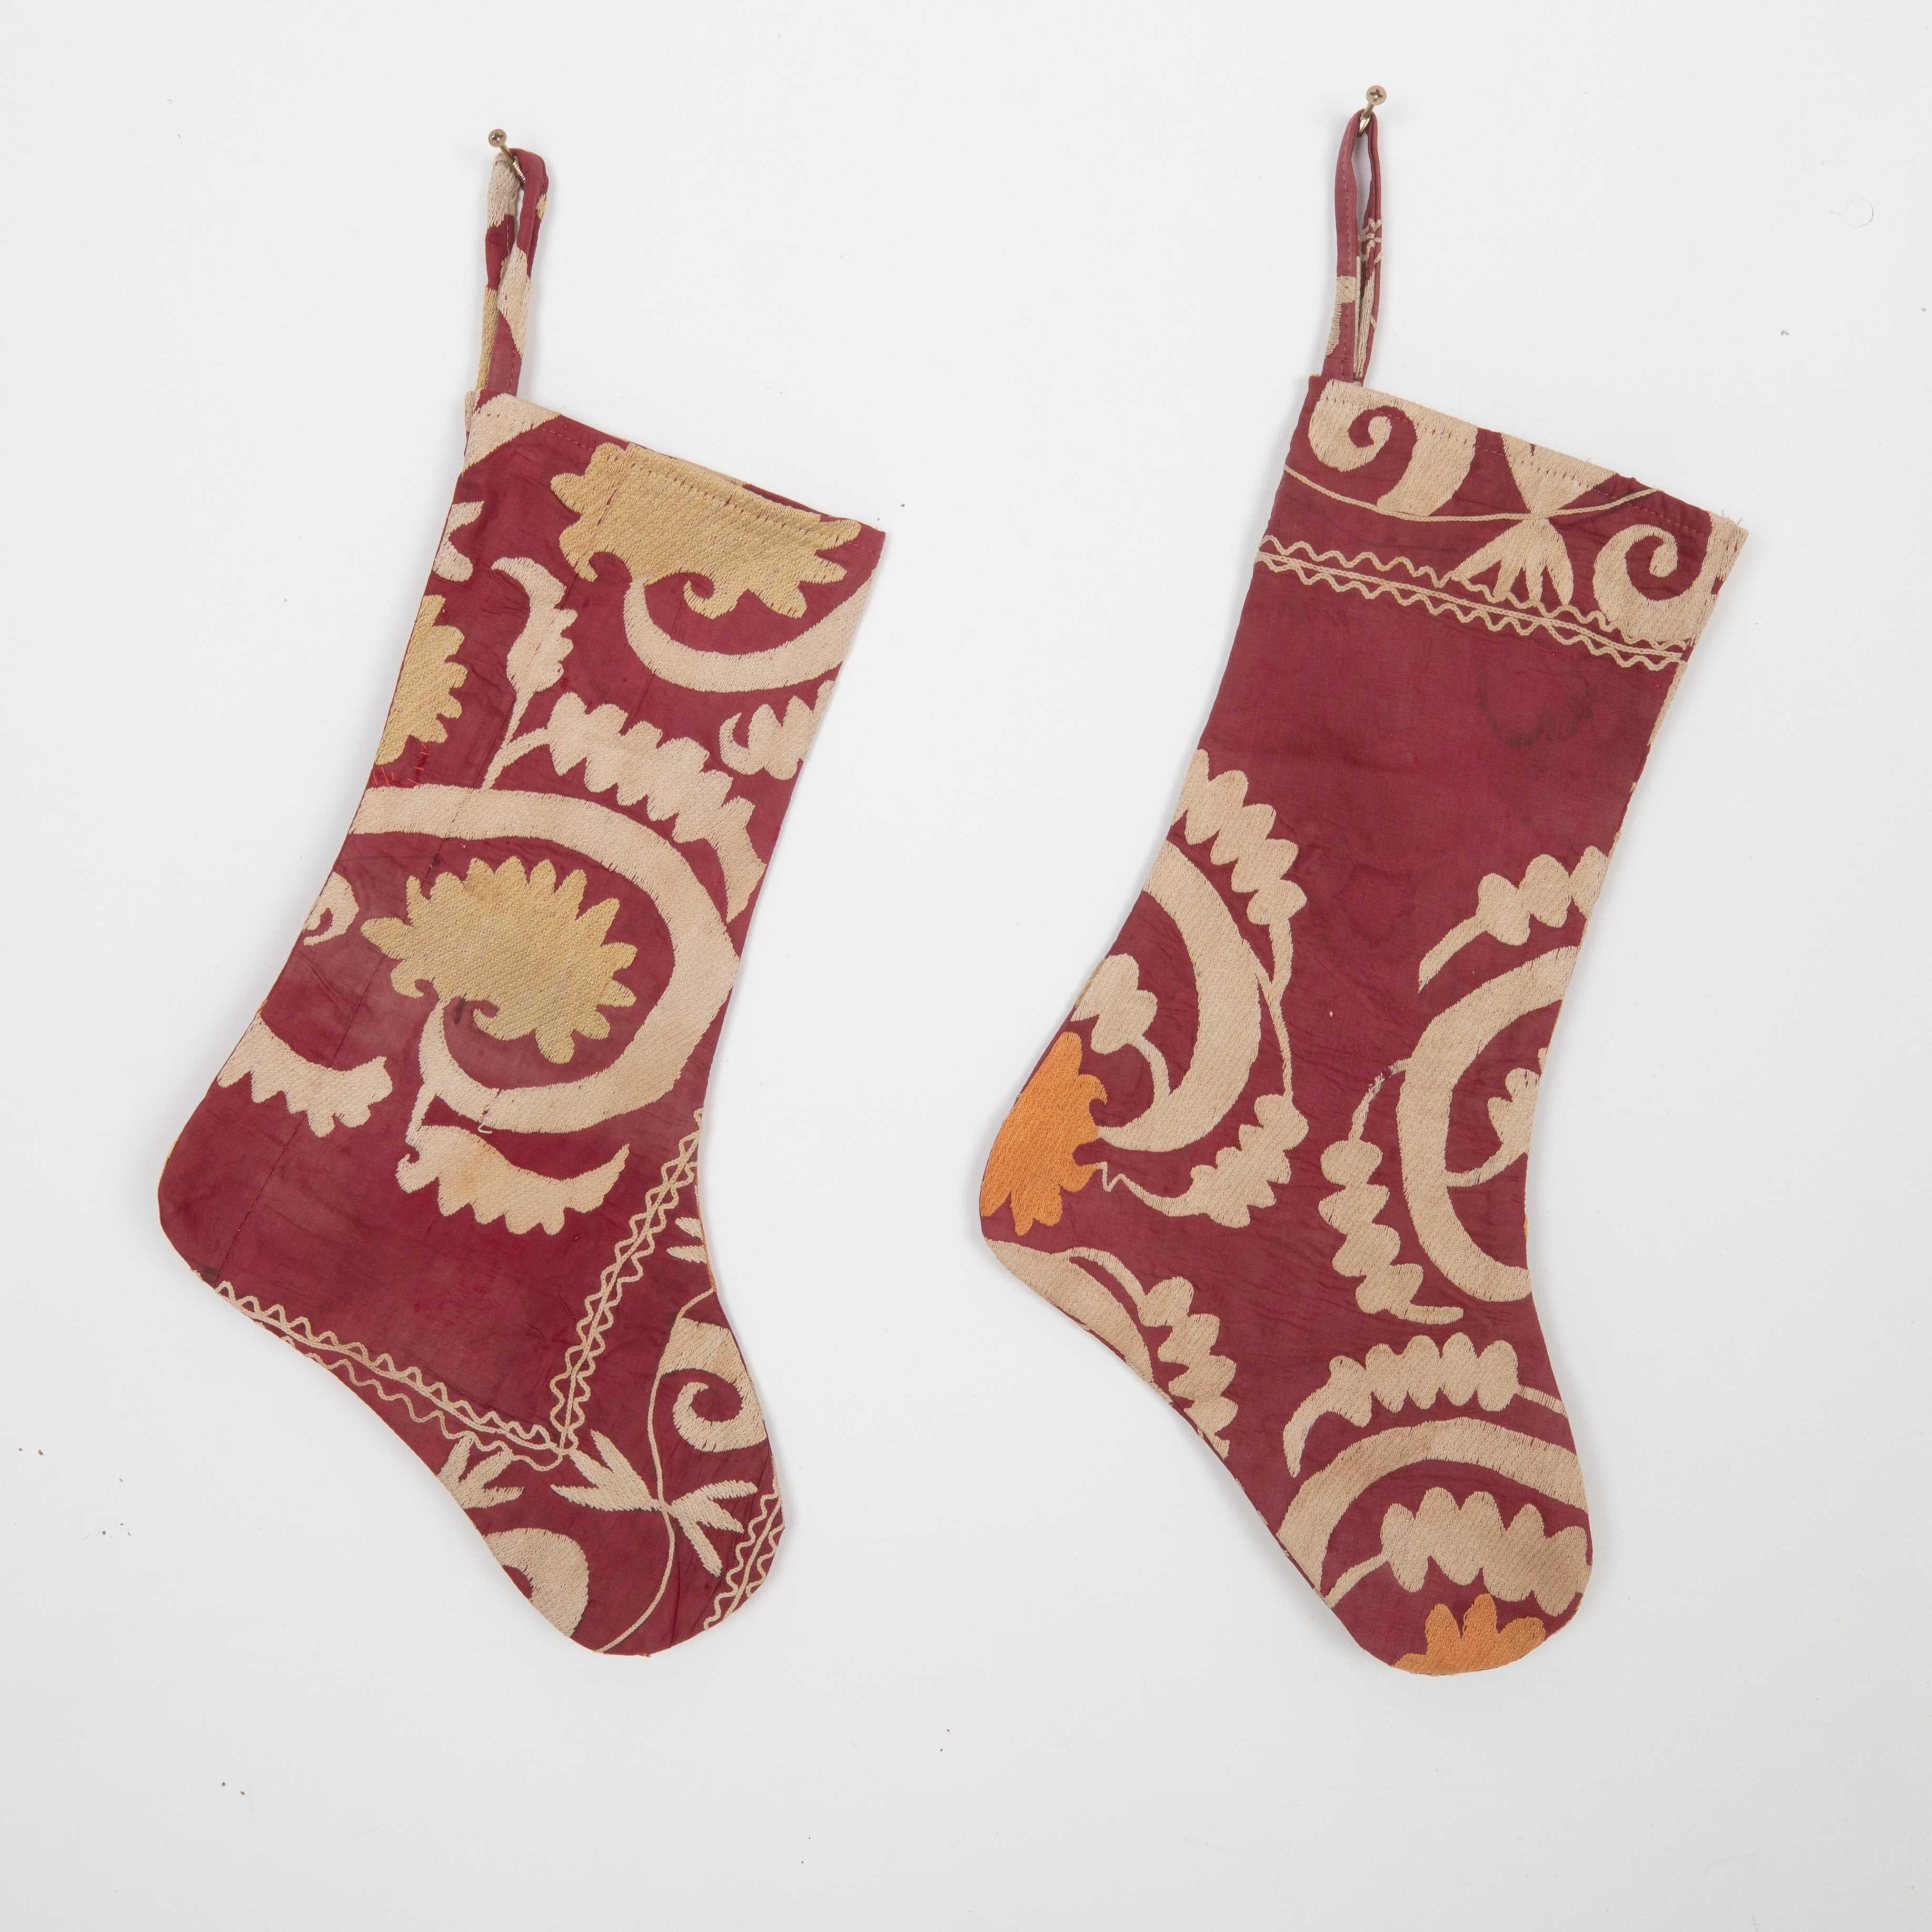 These Christmas Stockings were made from mid 20th C. Uzbek Suzani Fragments.

Please note these were made from vintage suzani fragments.
